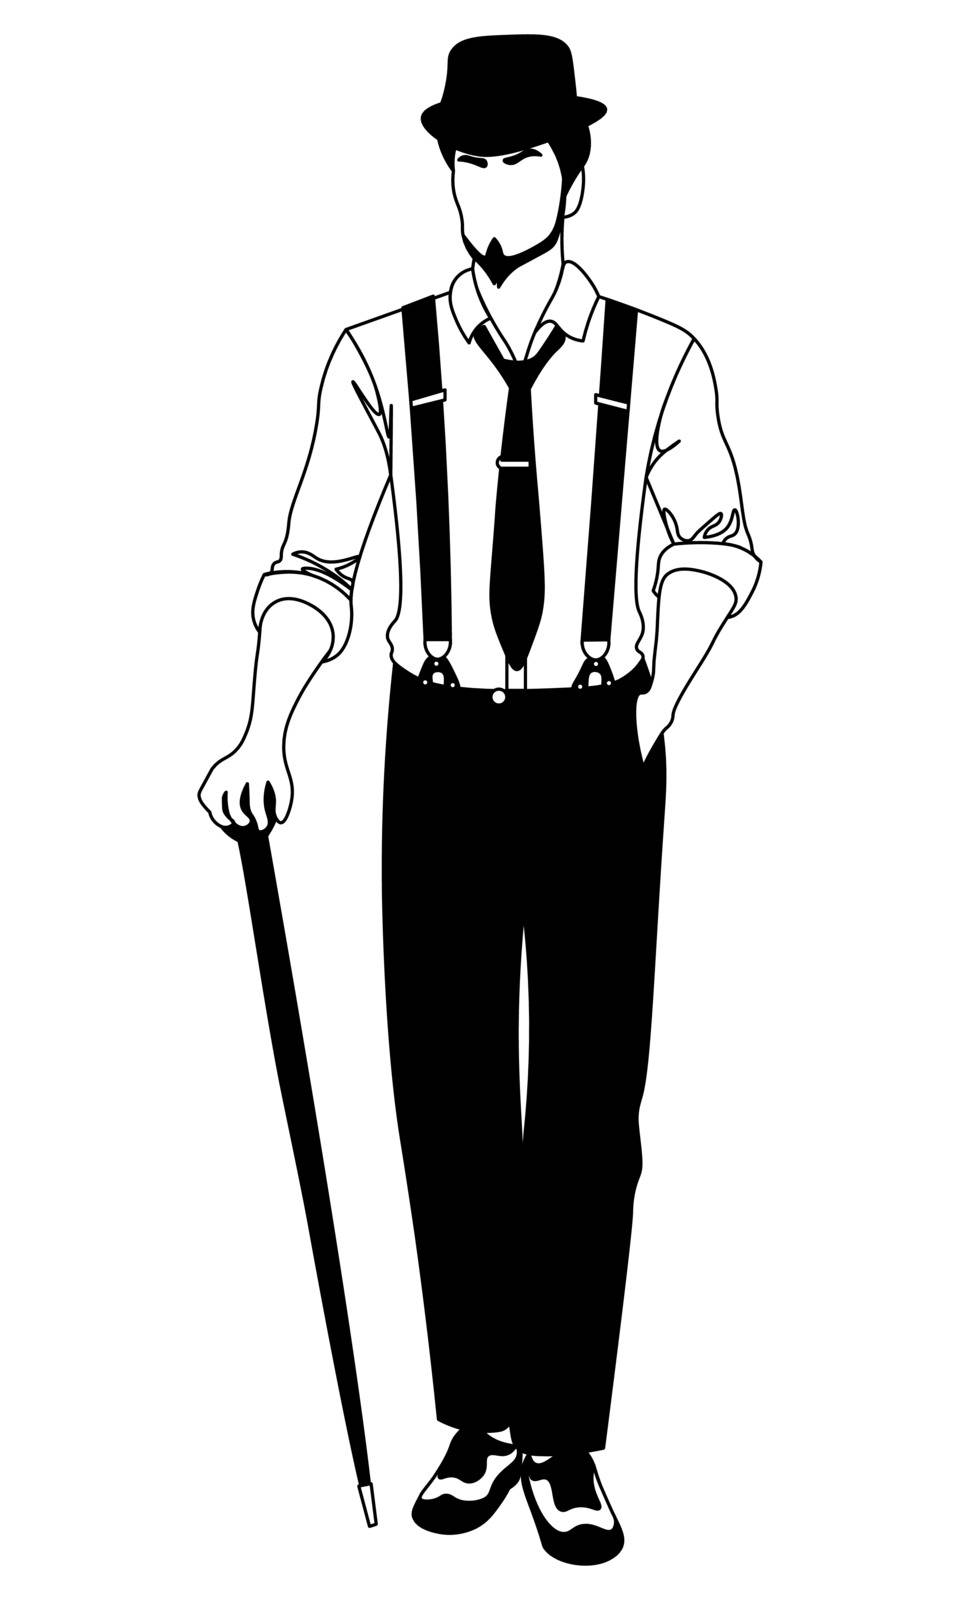 old-fashioned faceless man in hat and suspenders walking with a cane